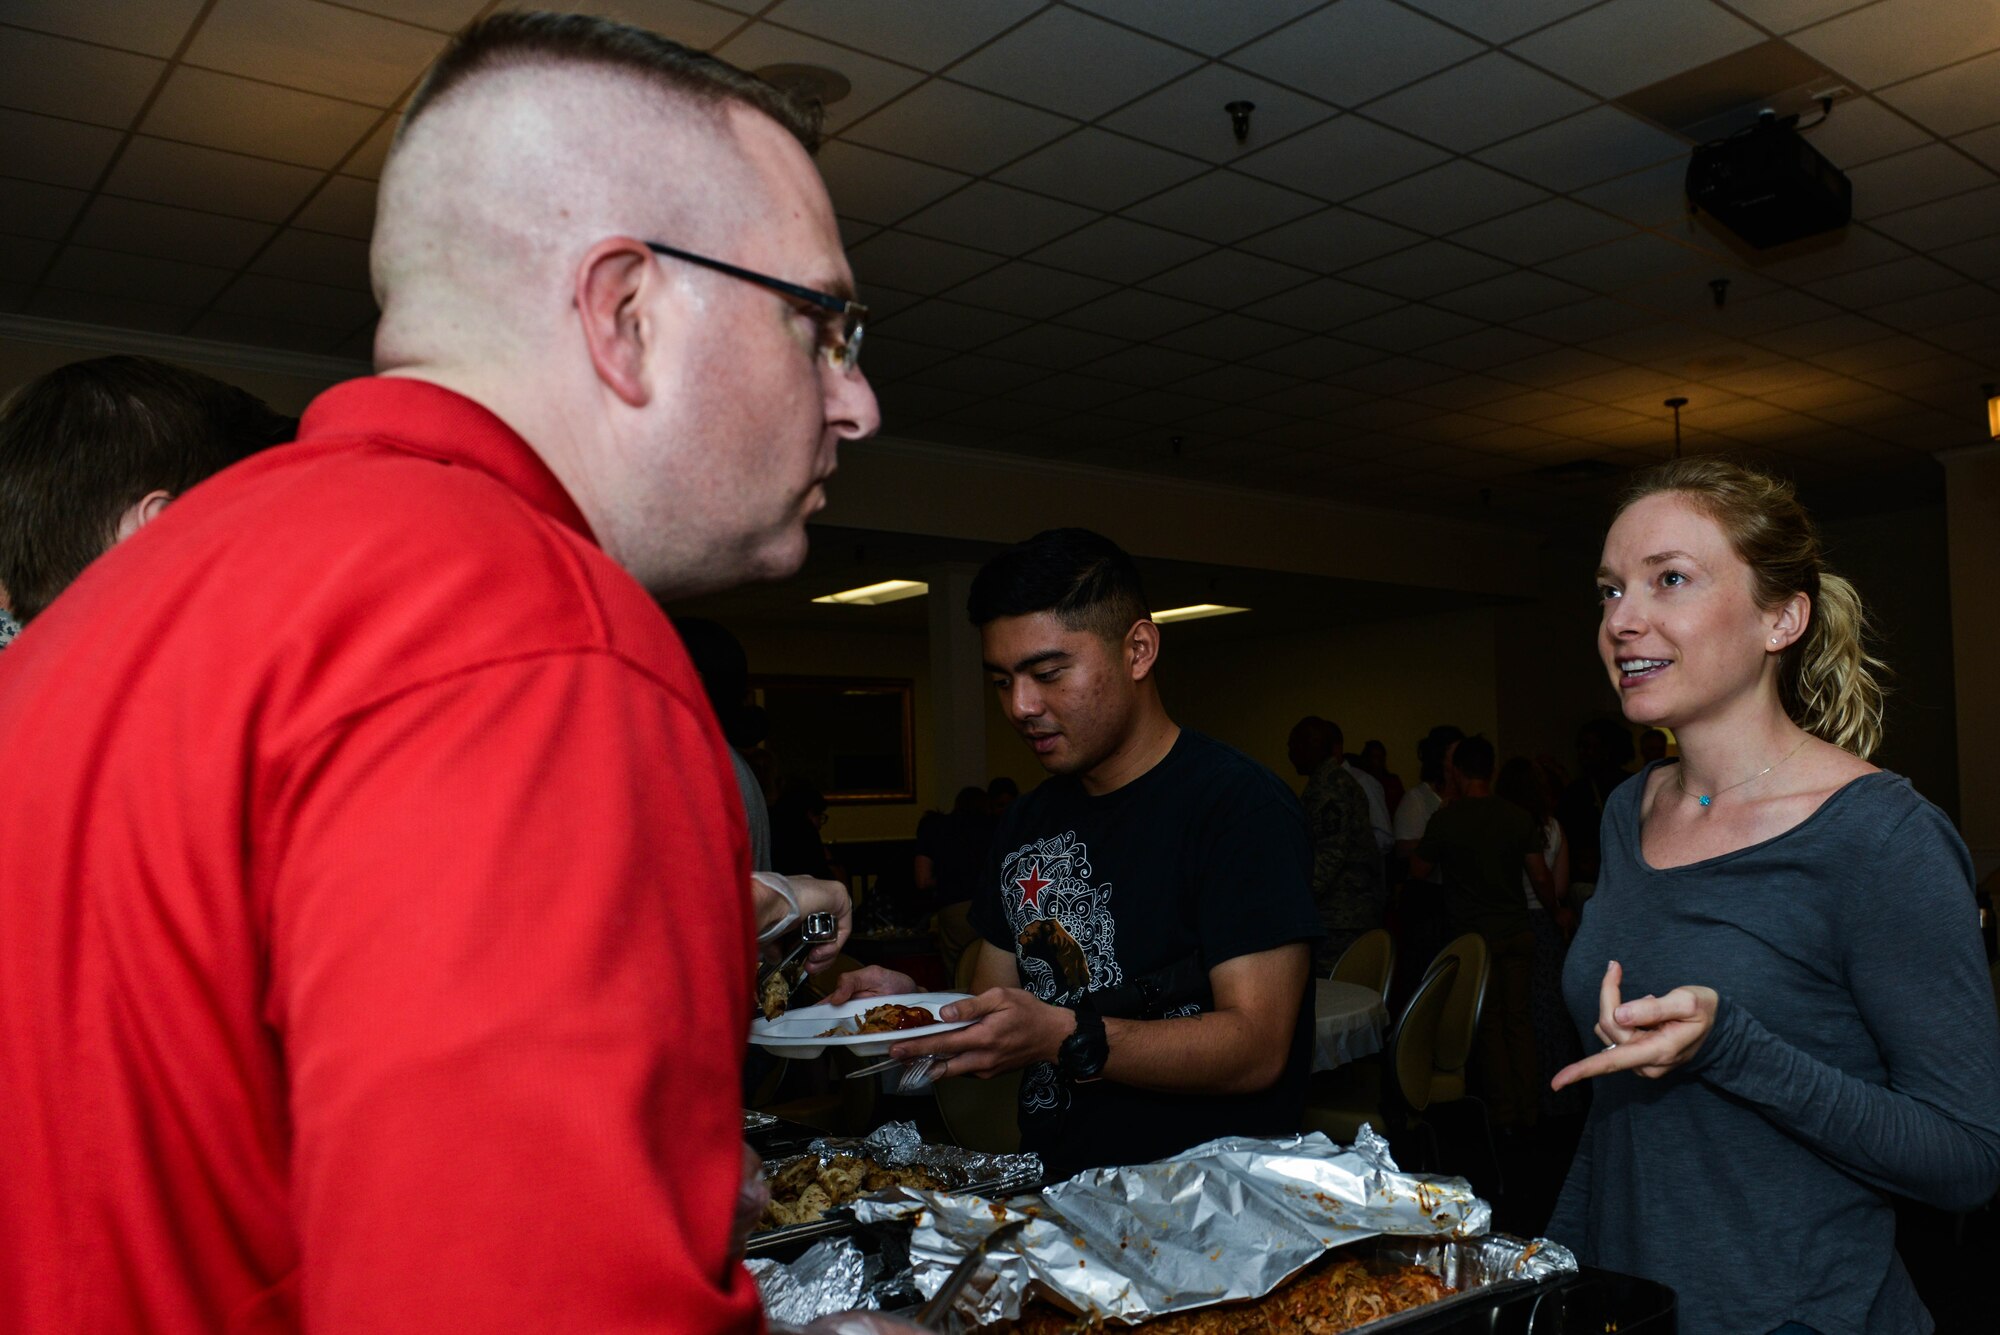 An attendee of the Deployed Family Dinner speaks with a volunteer serving food in a buffet line at the Carolina Skies Club and Conference Center at Shaw Air Force Base, S.C., July 24, 2017. Churches from the local area provided food during the dinner for the families of deployed service members. (U.S. Air Force photo by Airman 1st Class Destinee Sweeney)